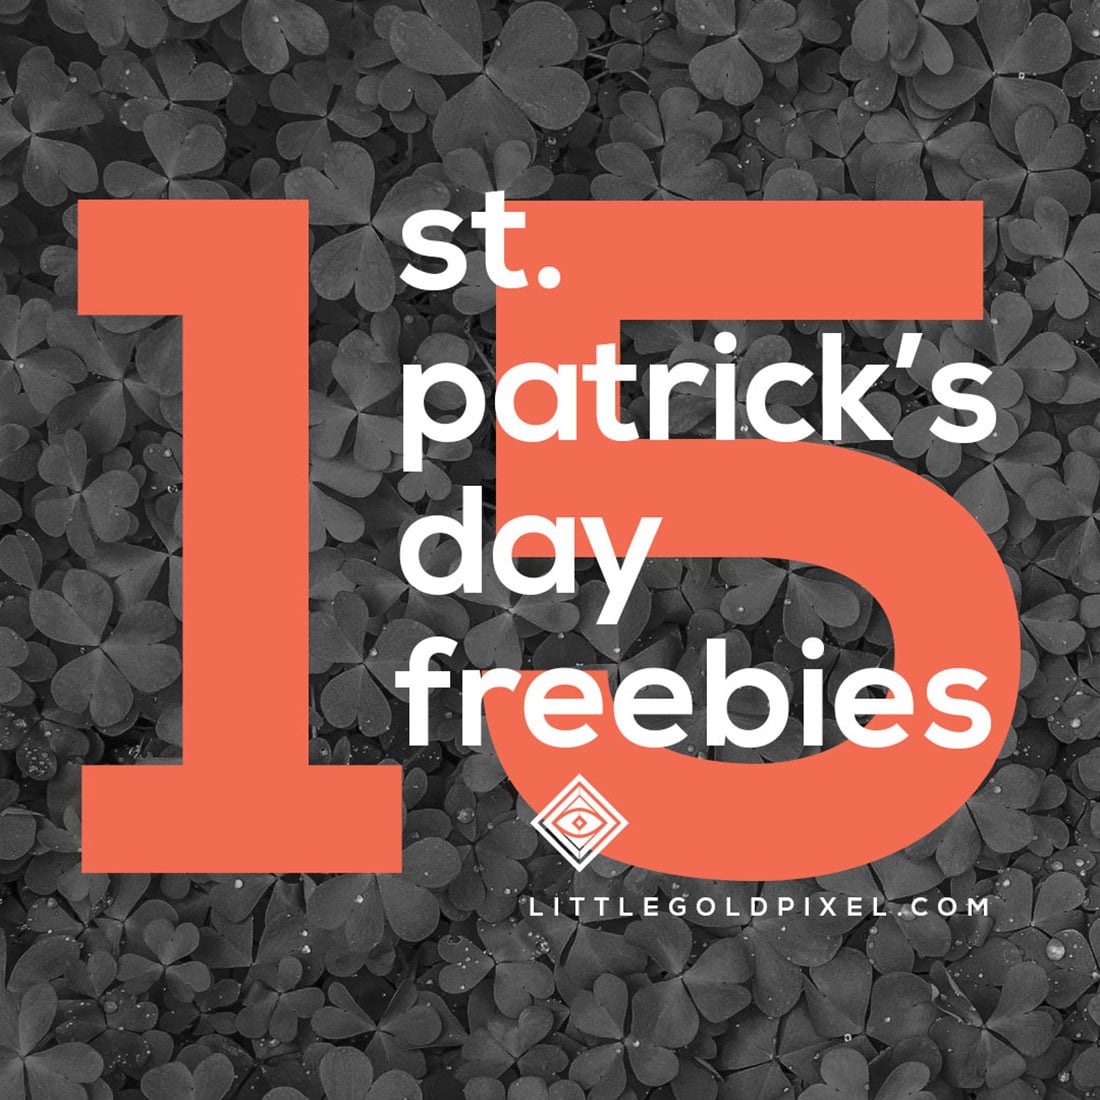 15 St. Patrick's Day Free Printables • A Roundup • Little Gold Pixel